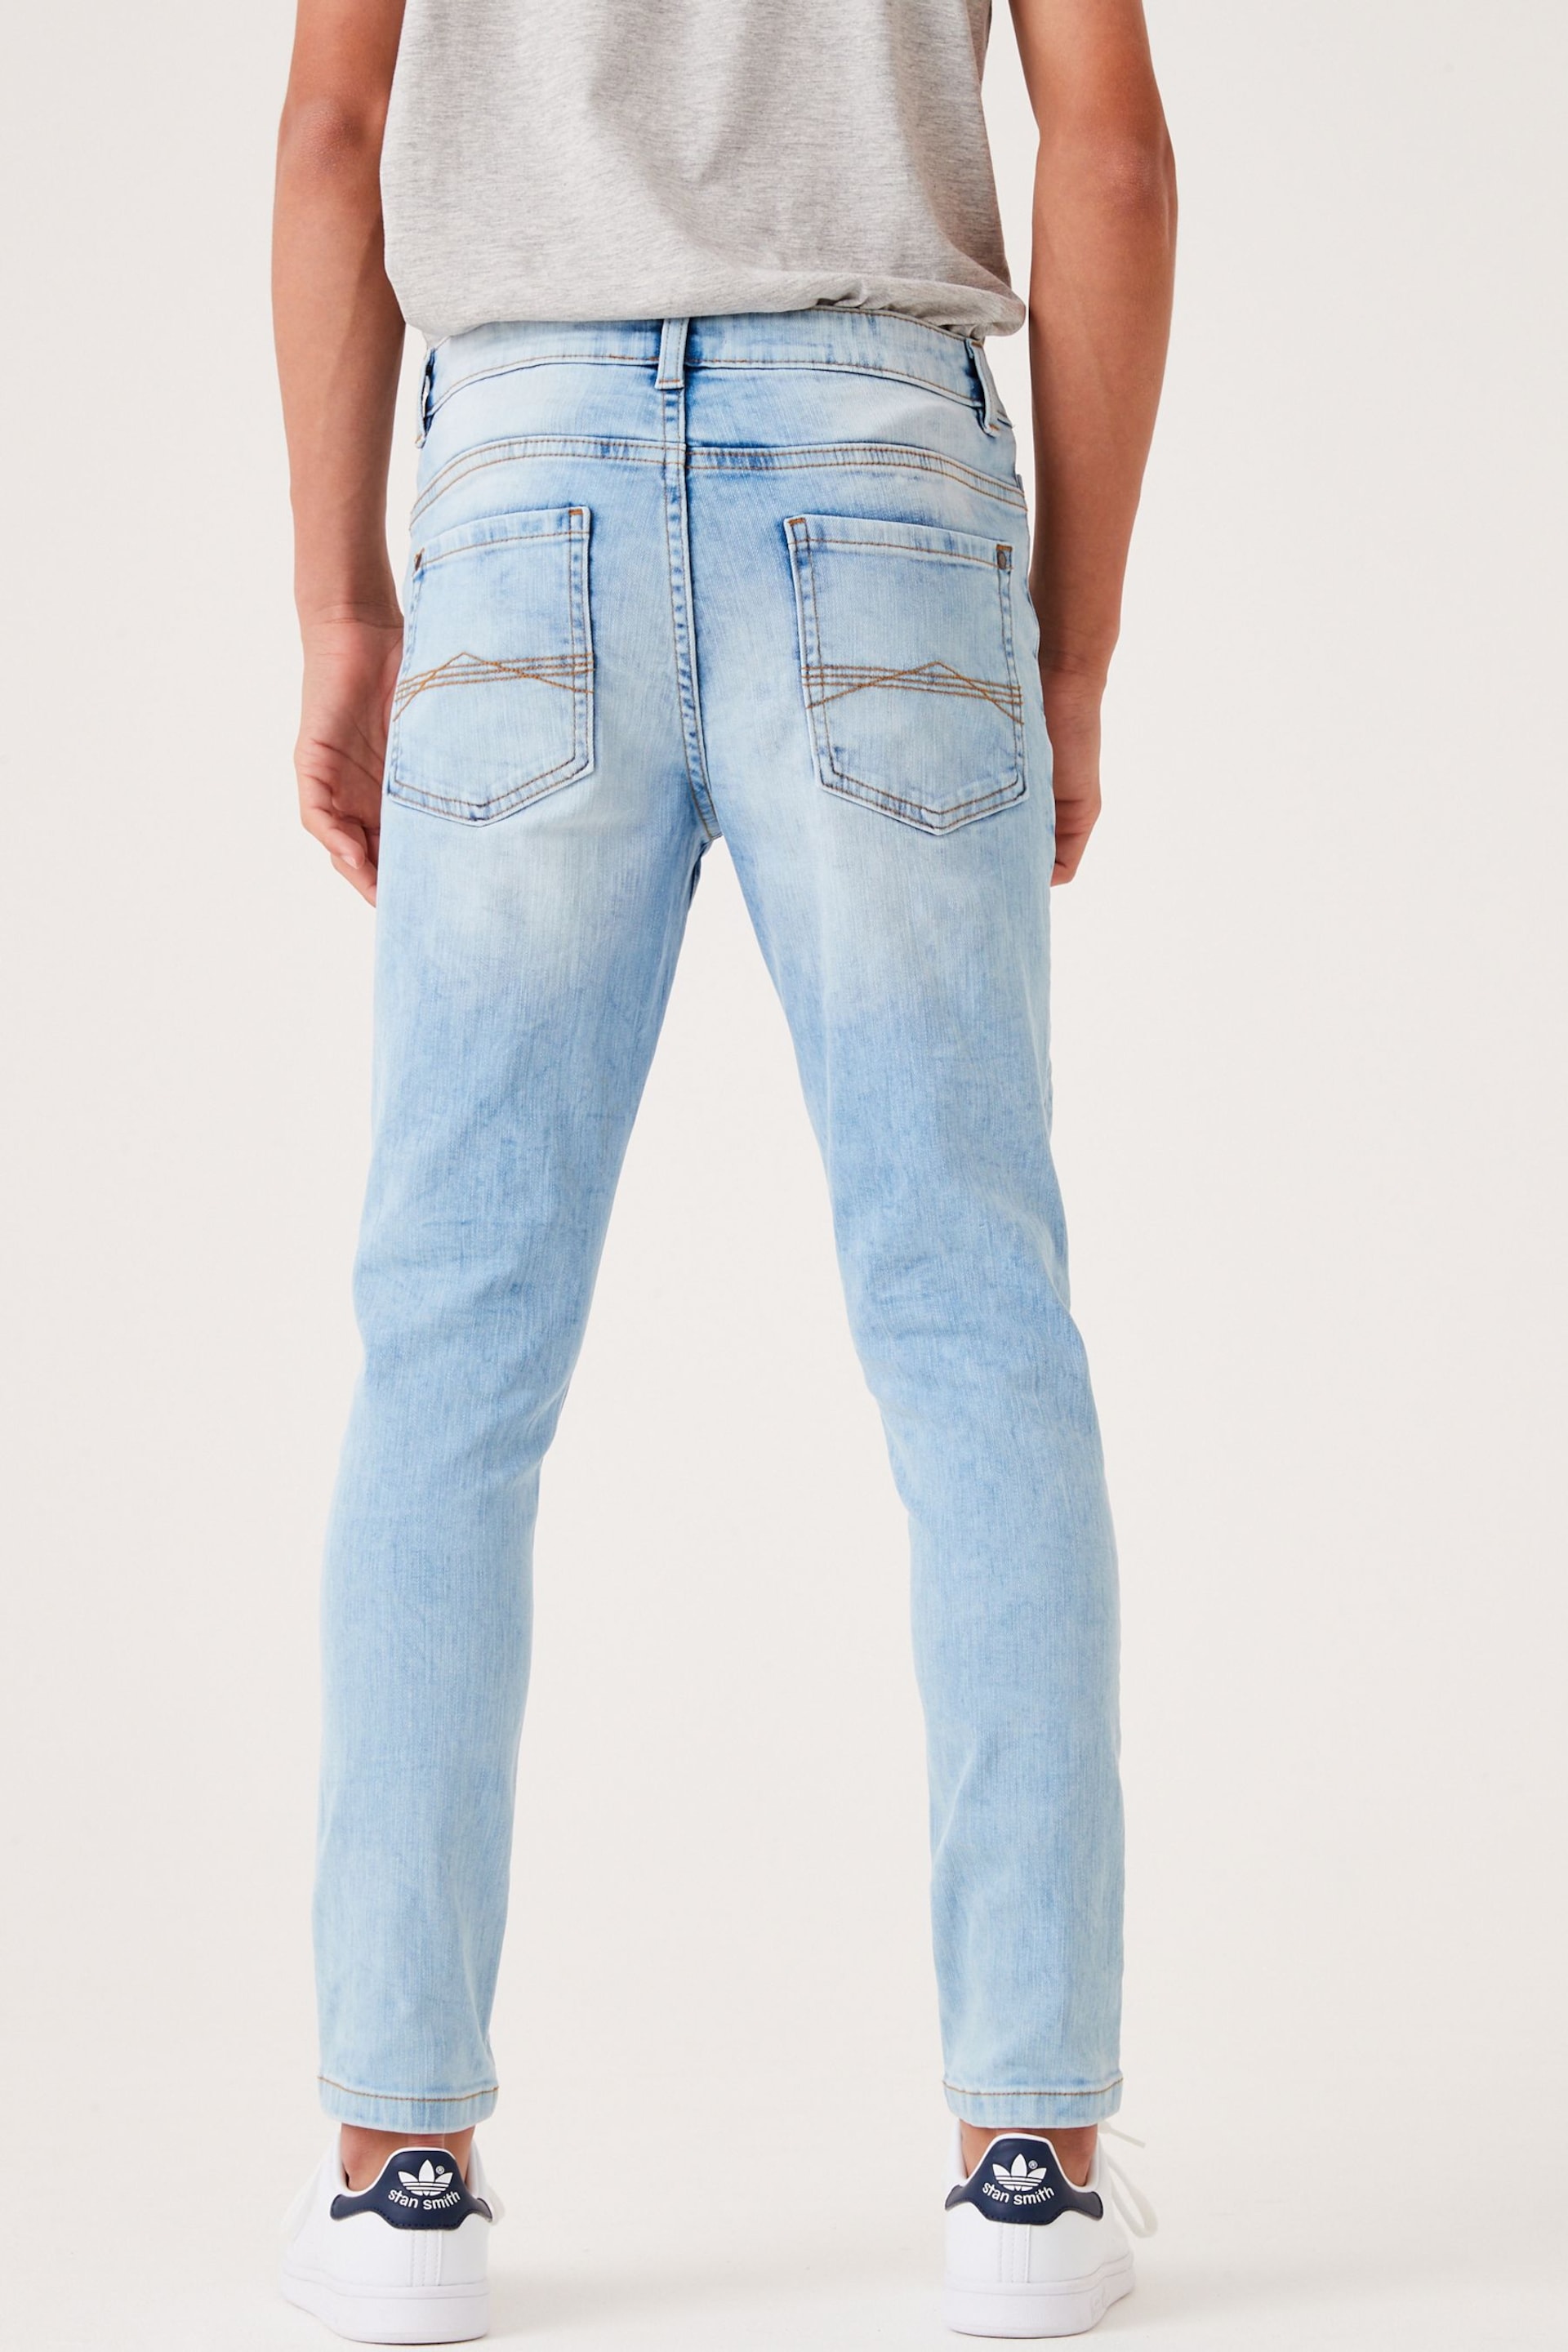 Blue Bleach Skinny Fit Cotton Rich Stretch Jeans (3-17yrs) - Image 3 of 7